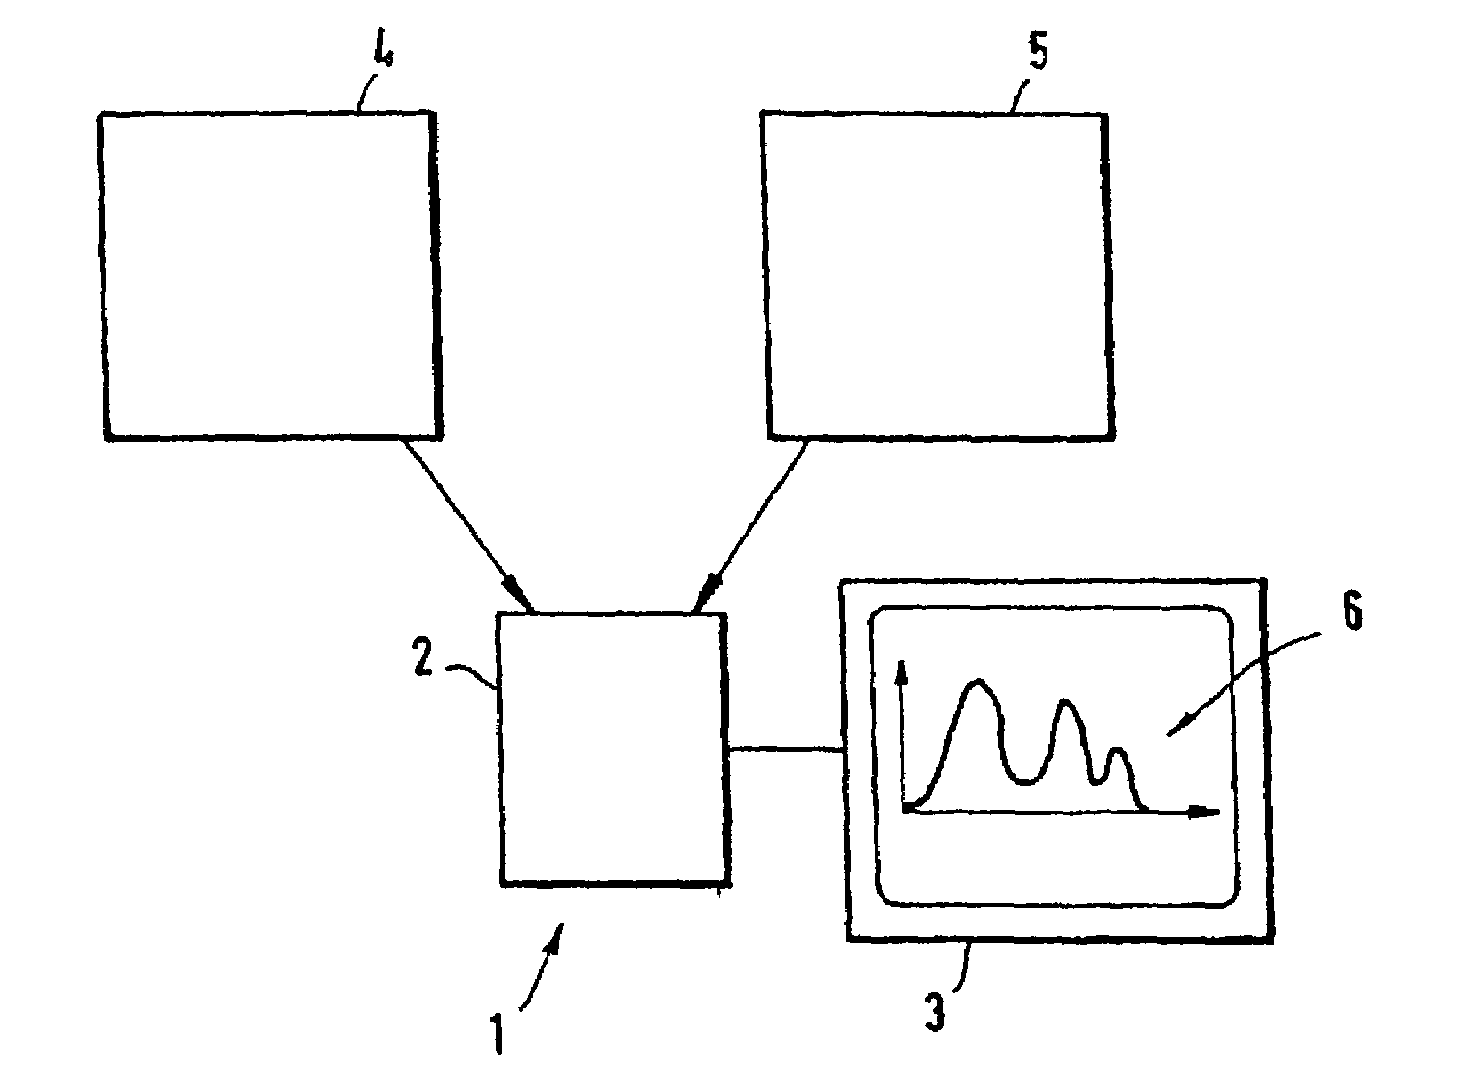 Device for processing images, in particular medical images